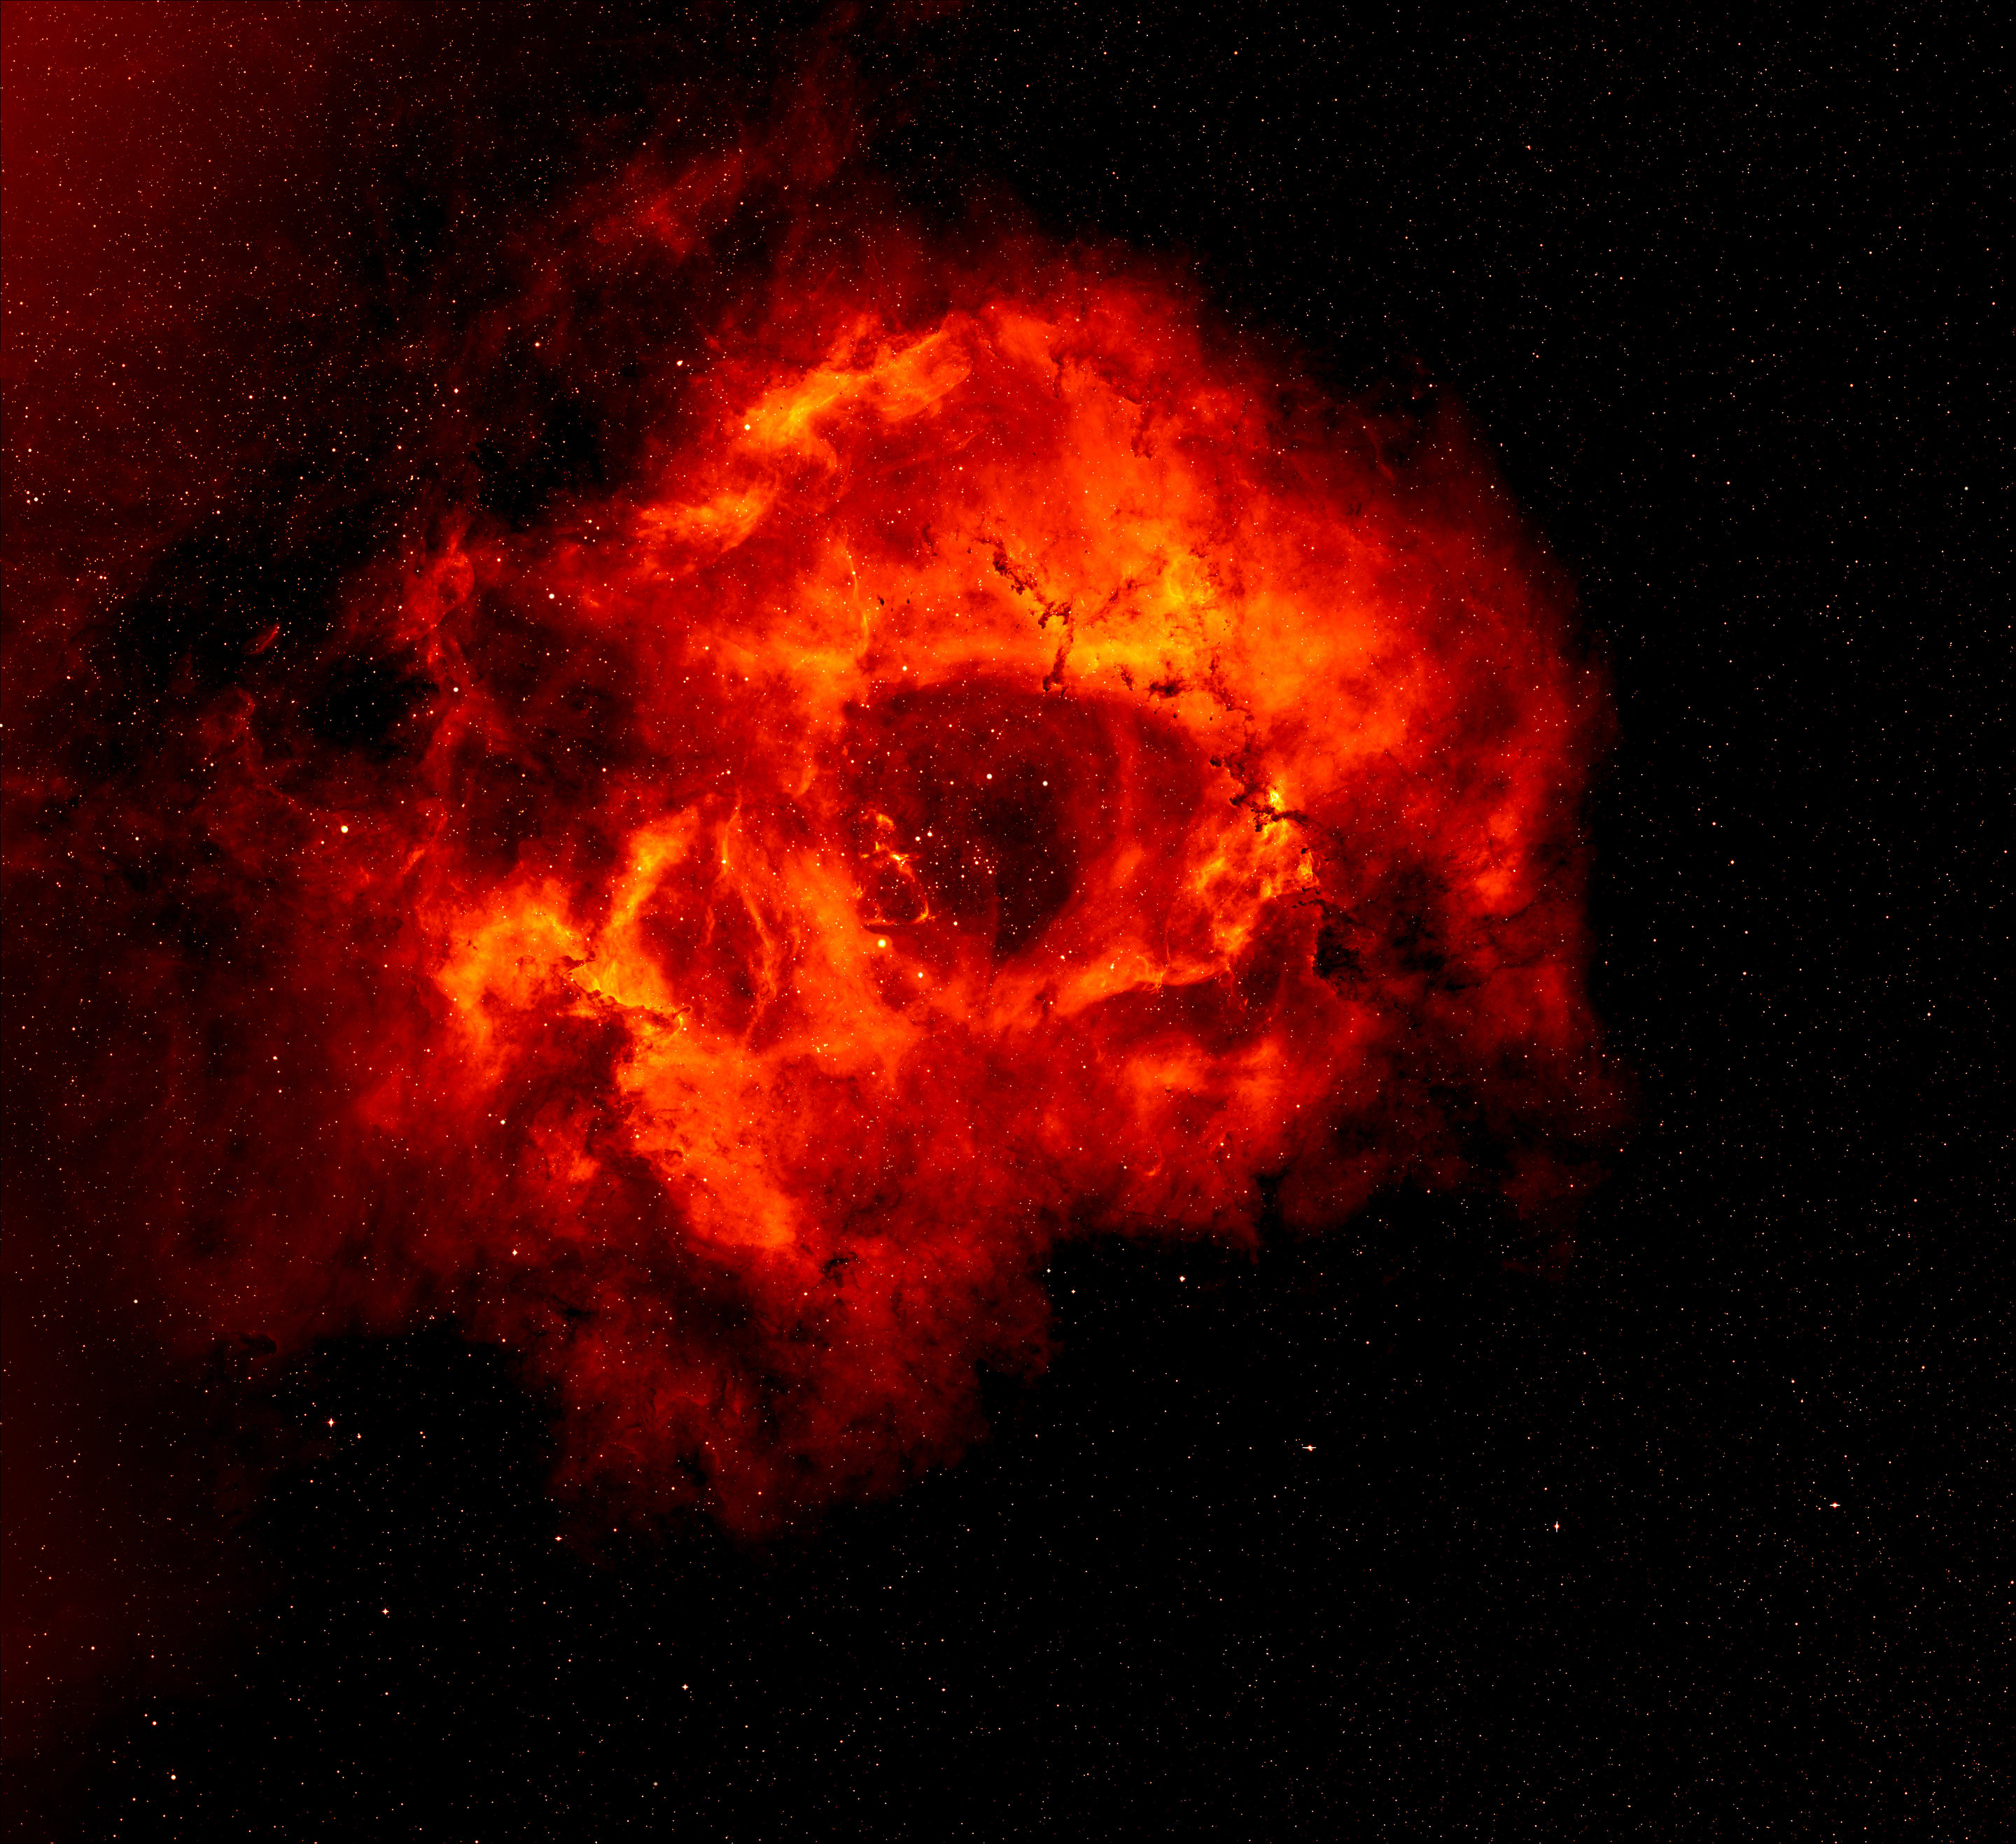 New models give insight into the heart of the Rosette Nebula